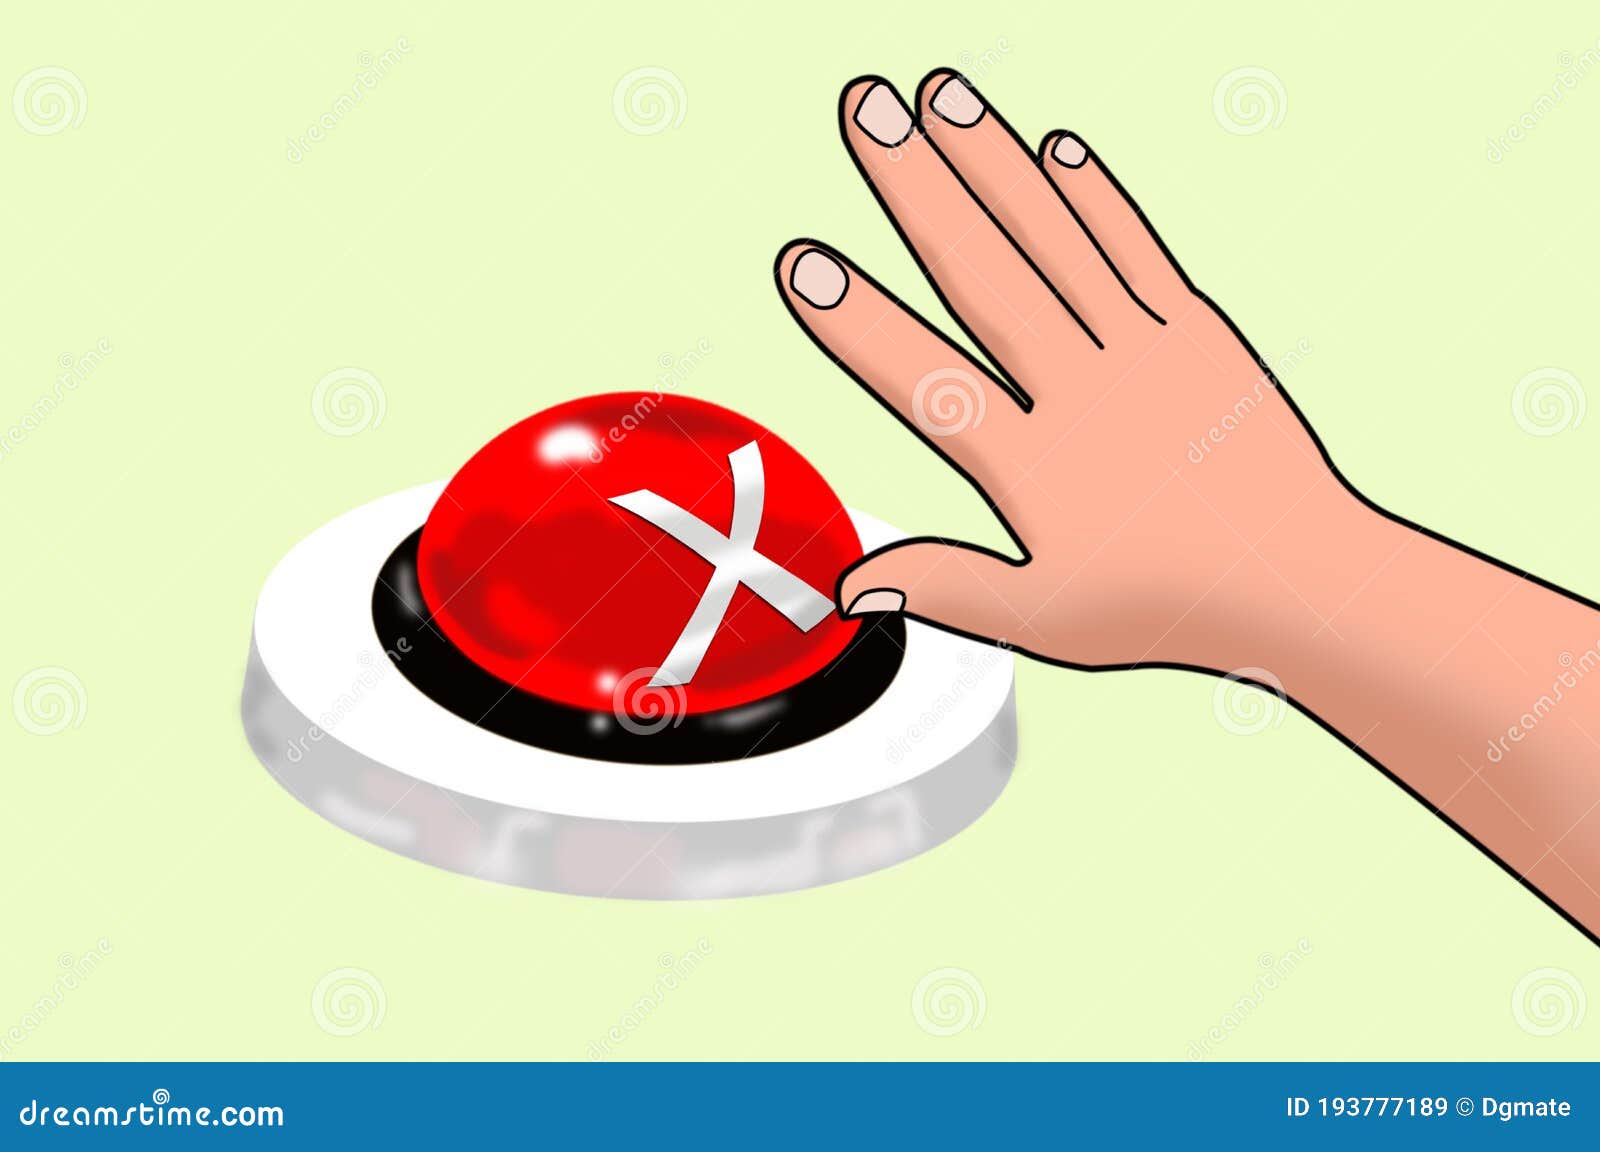 x button used in contests with judge`s hand